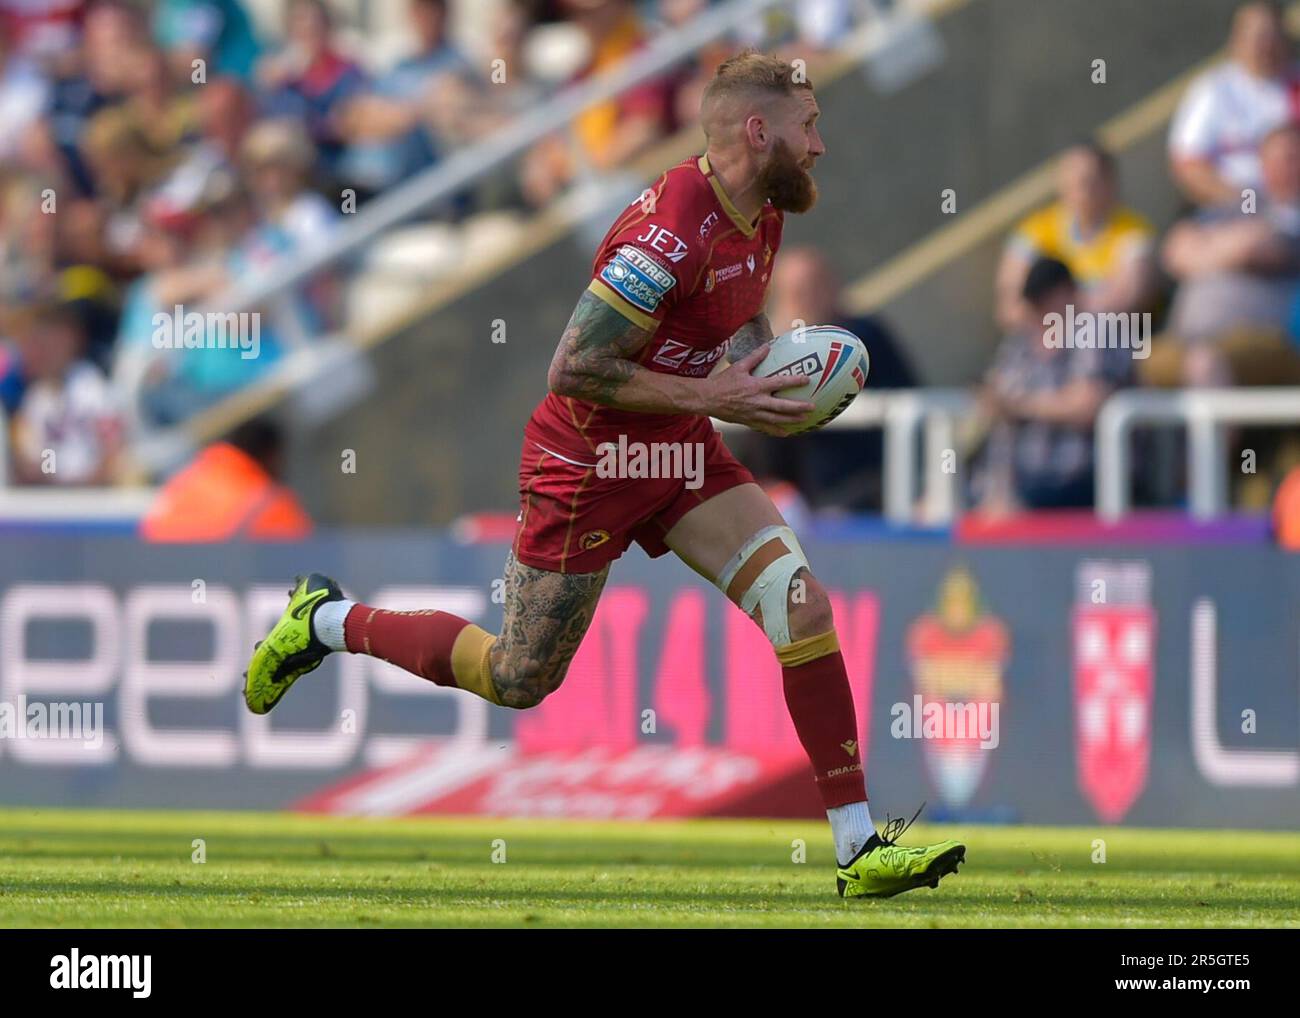 Sam Tomkins #29 of Catalans Dragons during the Betfred Super League Magic Weekend match Wigan Warriors vs Catalans Dragons at St. James's Park, Newcastle, United Kingdom, 3rd June 2023 (Photo by Craig Cresswell/News Images) Stock Photo